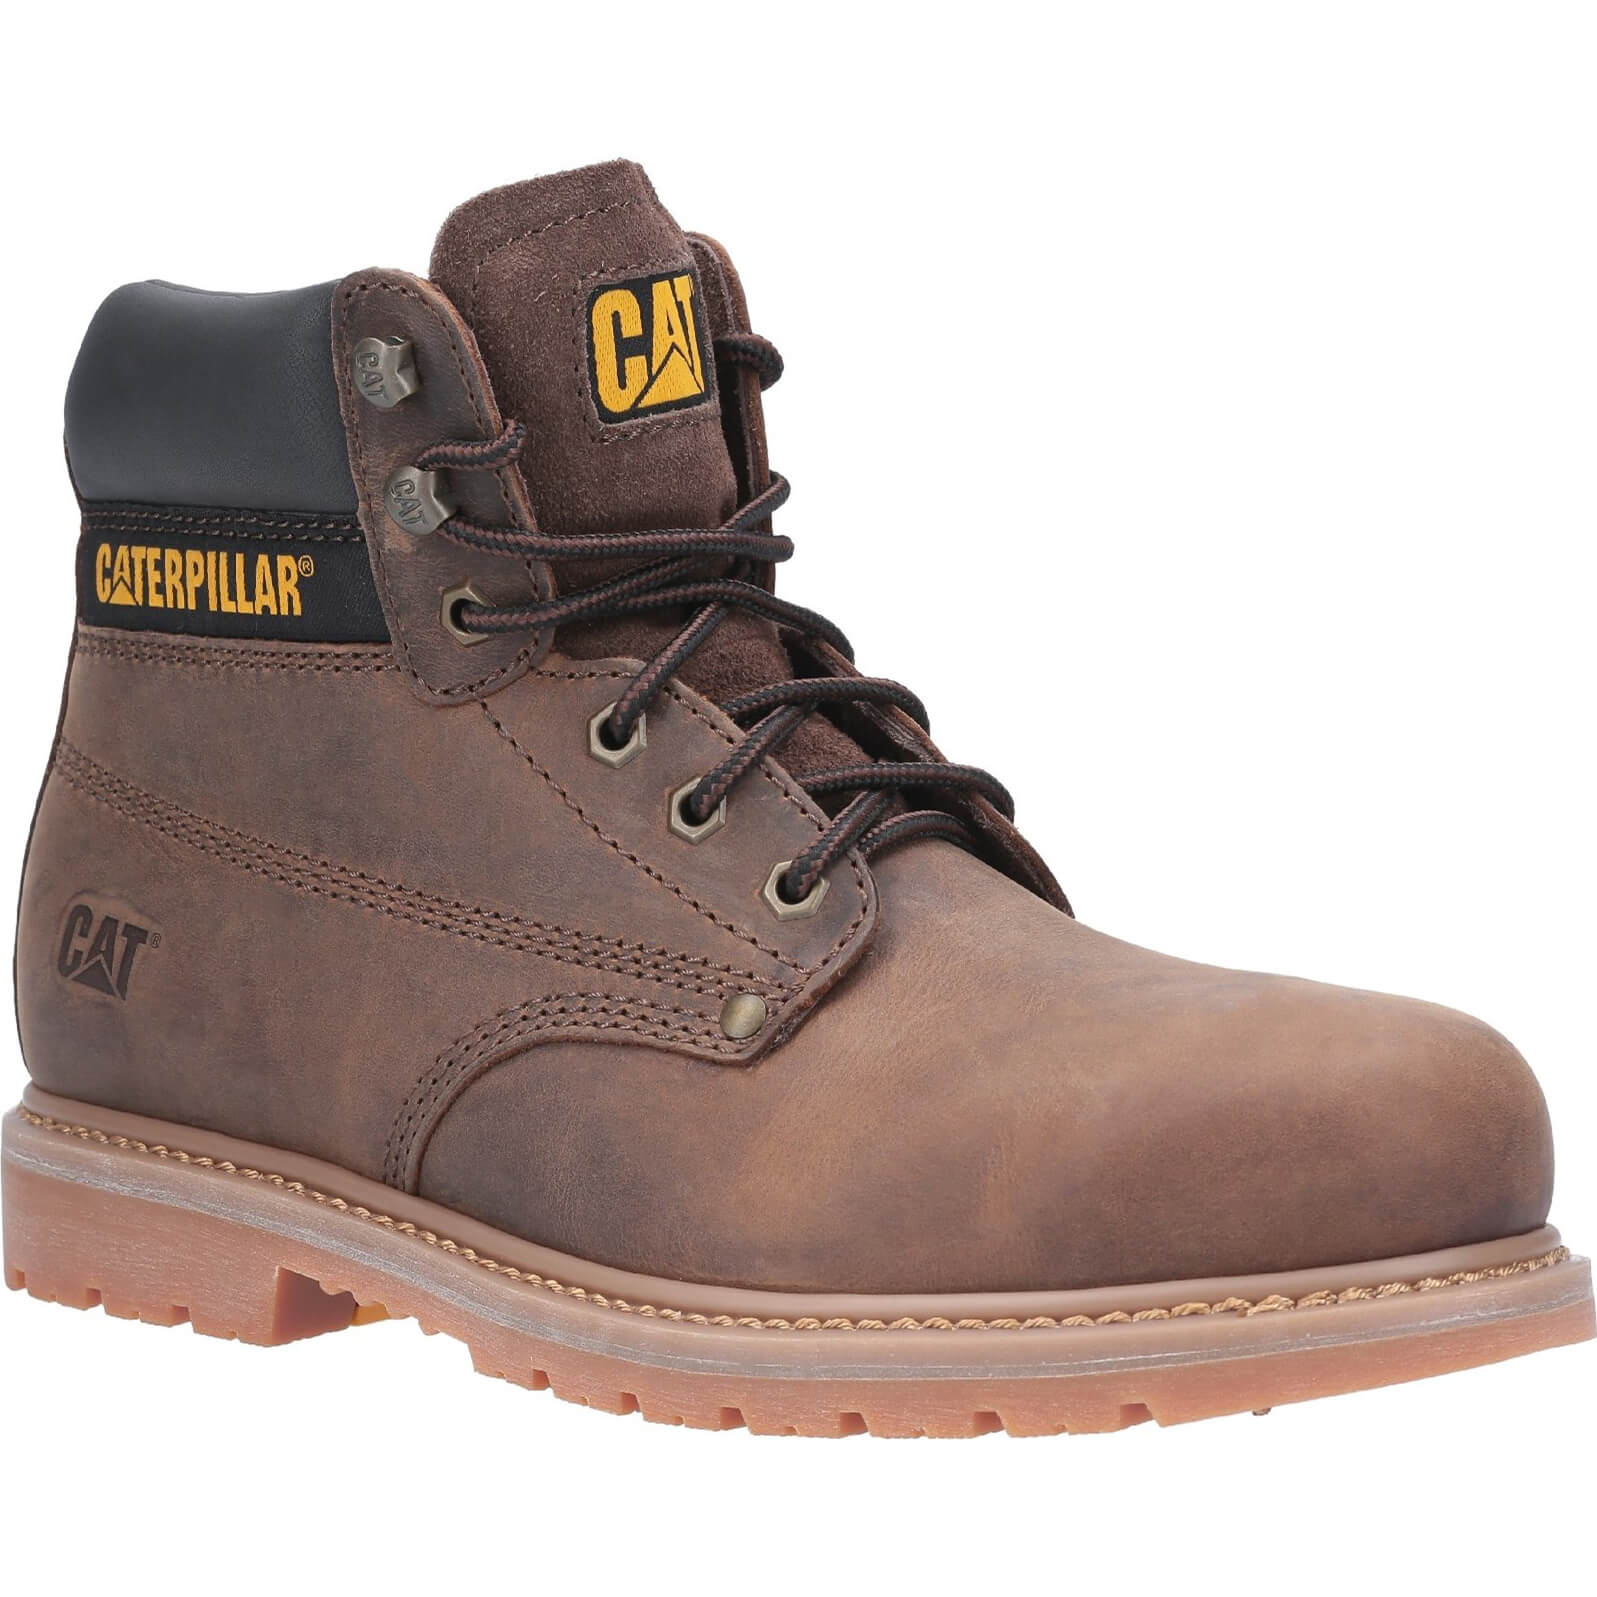 Image of Caterpillar Powerplant GYW Safety Boot Brown Size 7